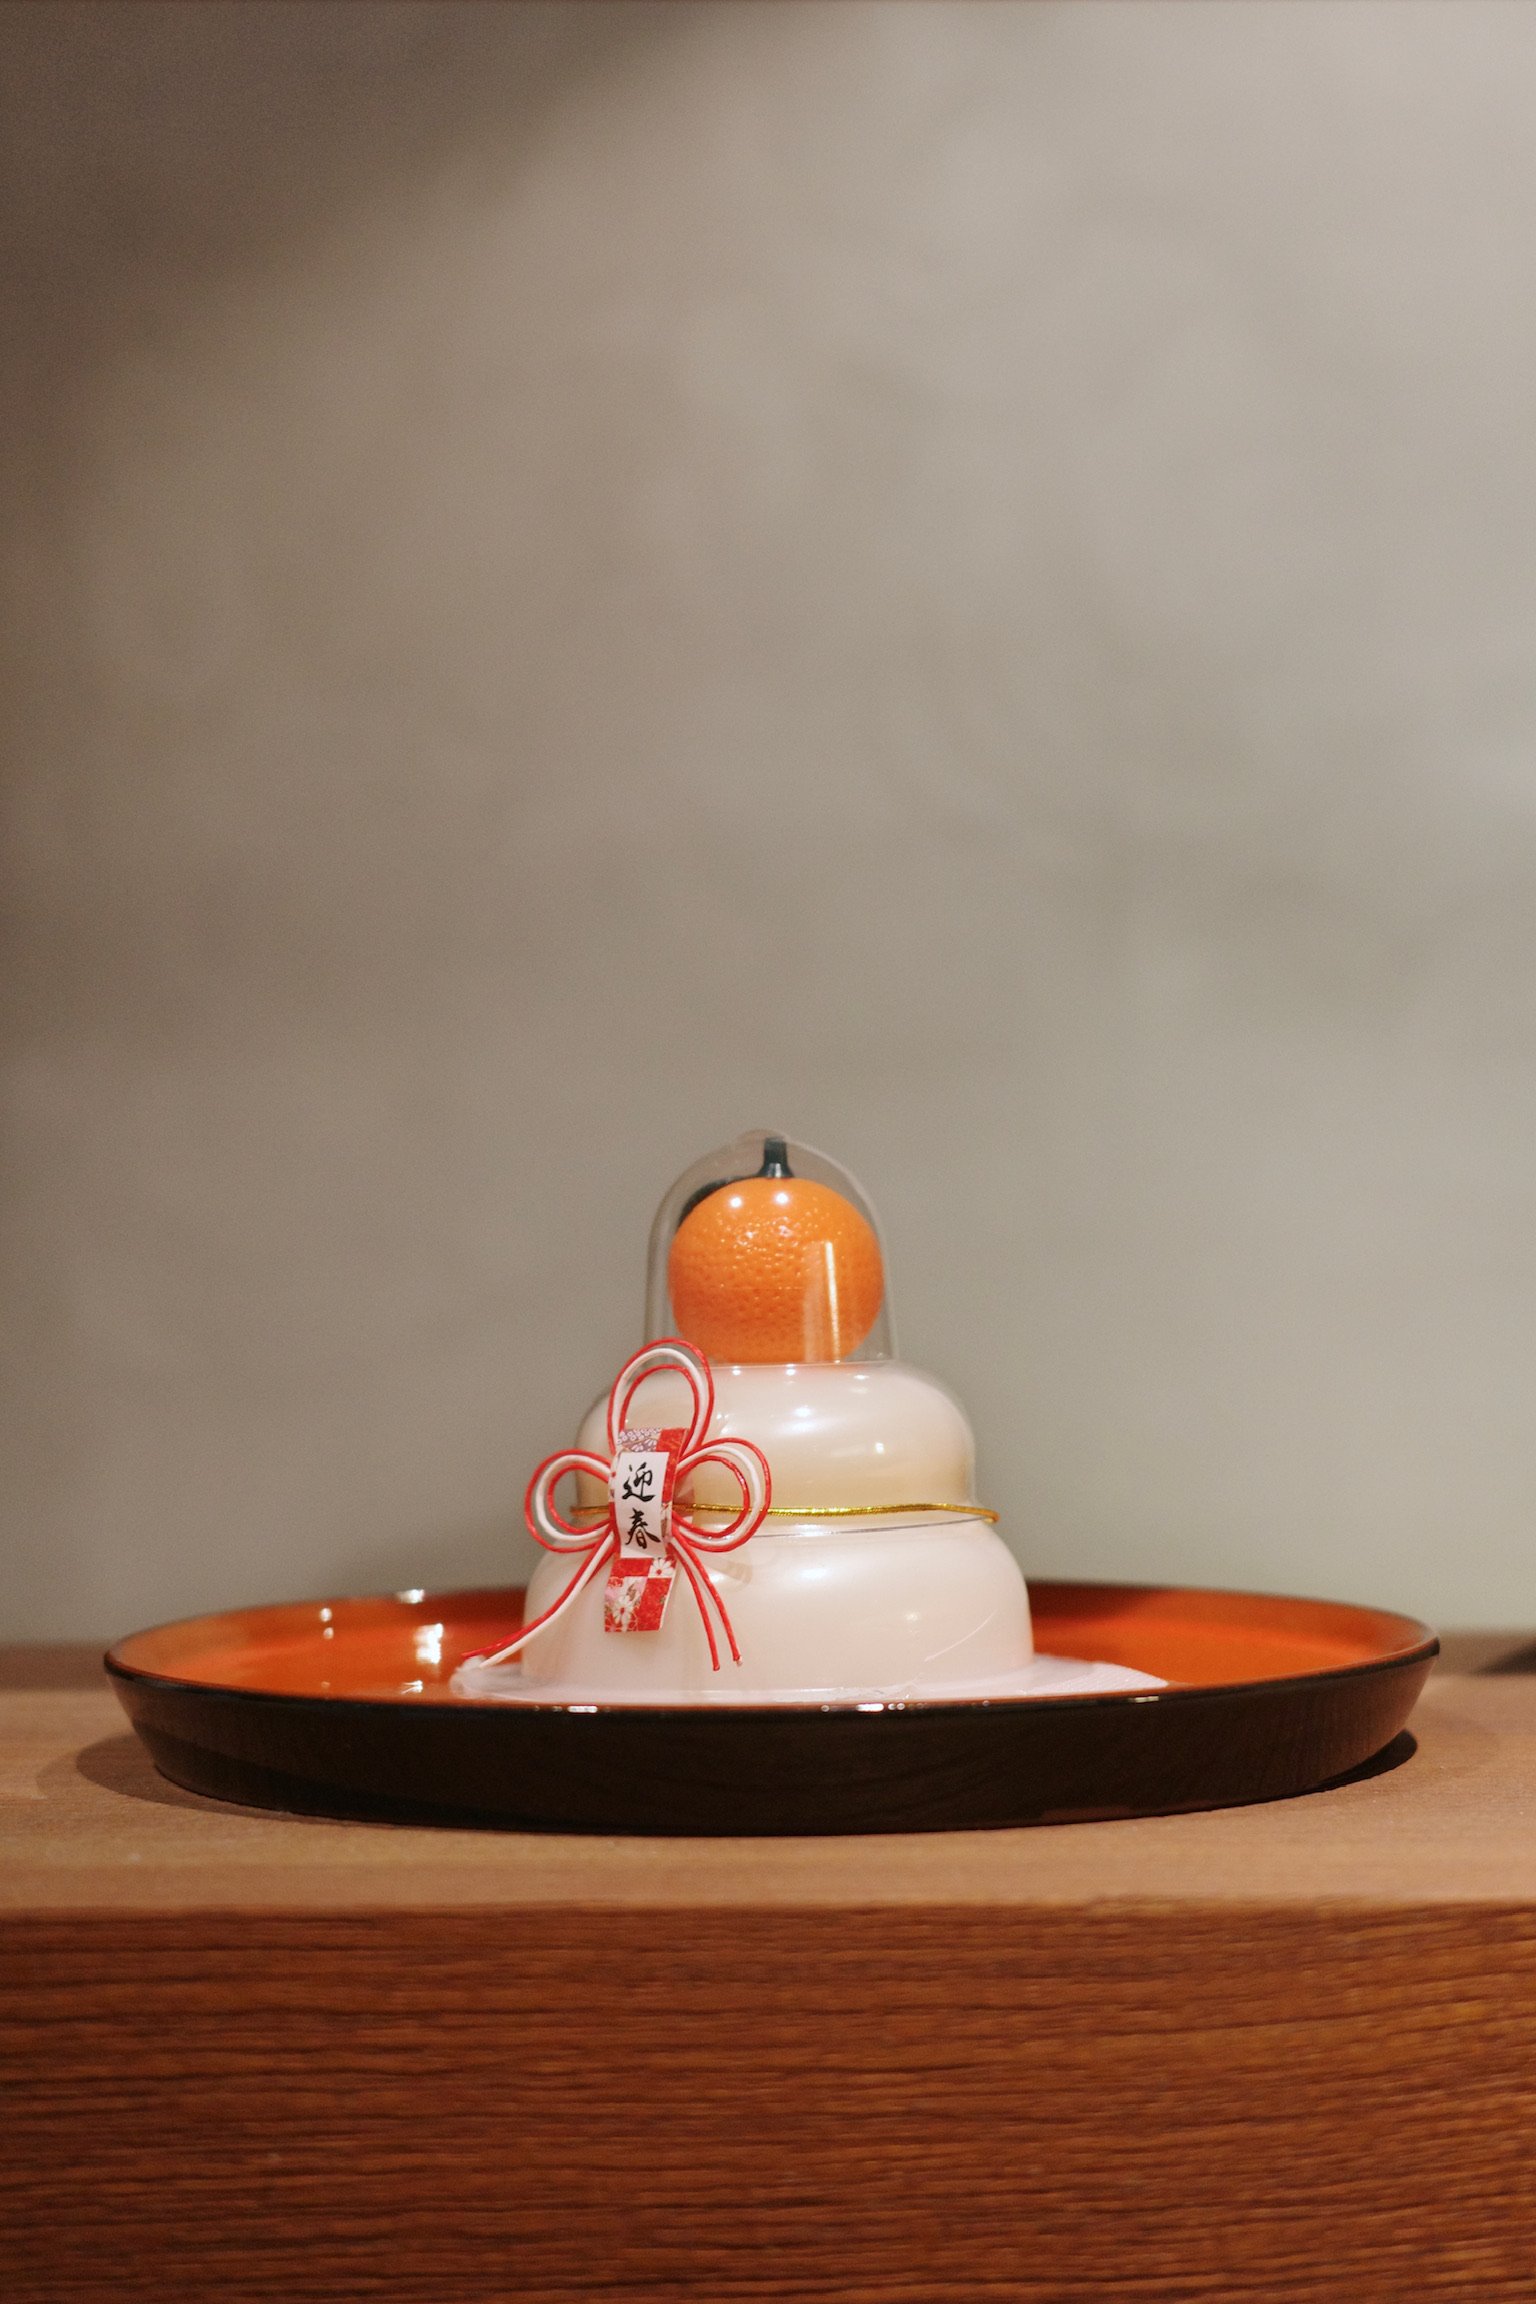 Kagami Mochi on a black and orange plate on a wooden shelf.